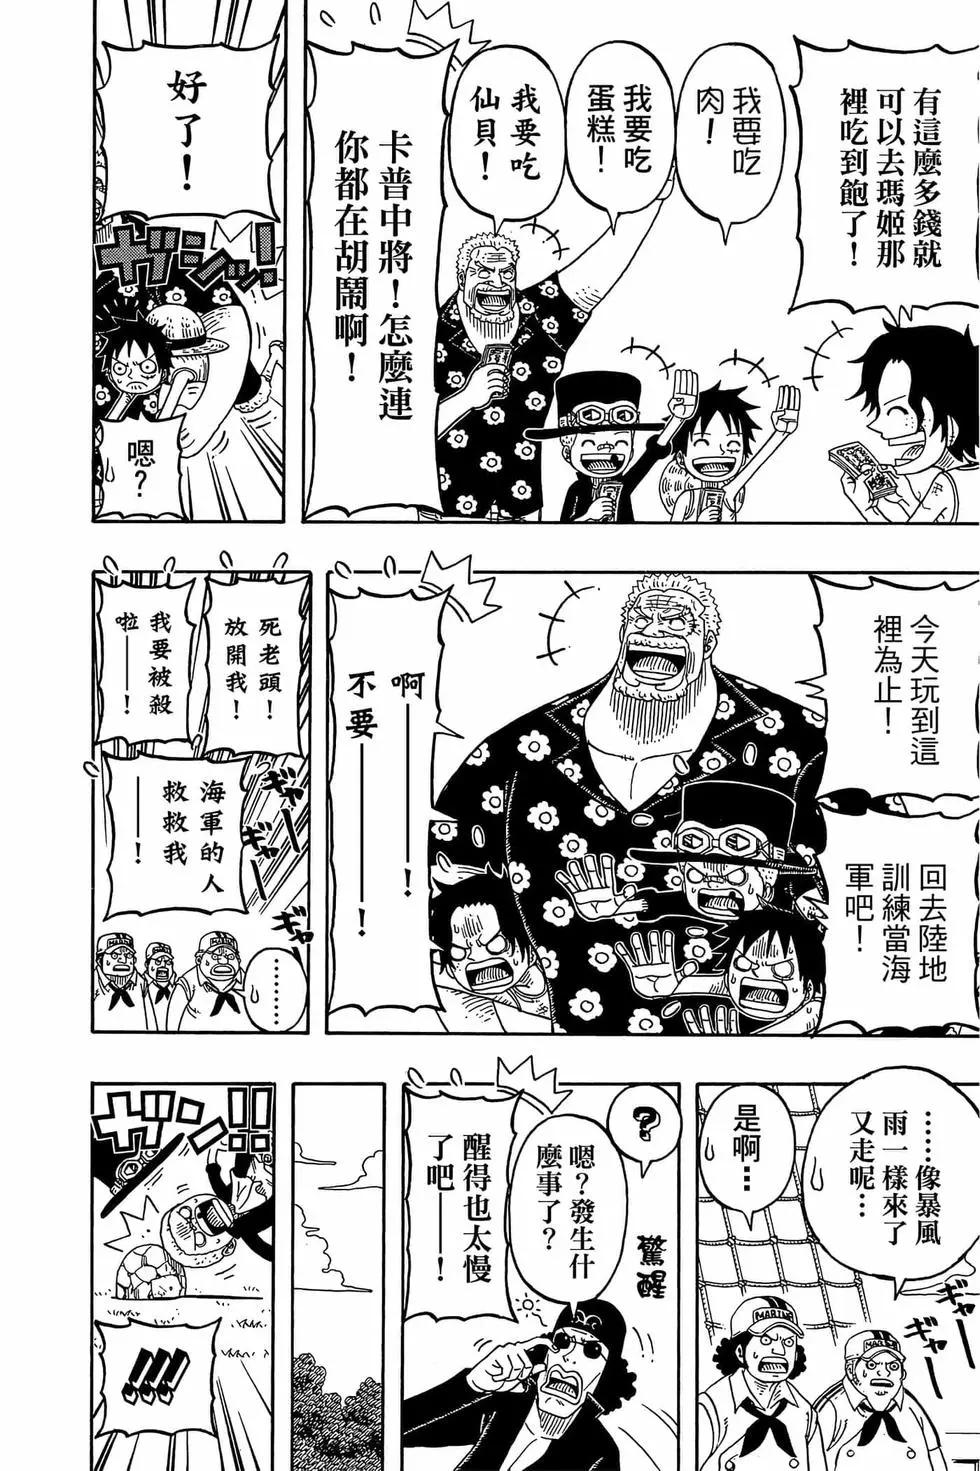 One piece party - 第03卷(1/4) - 1